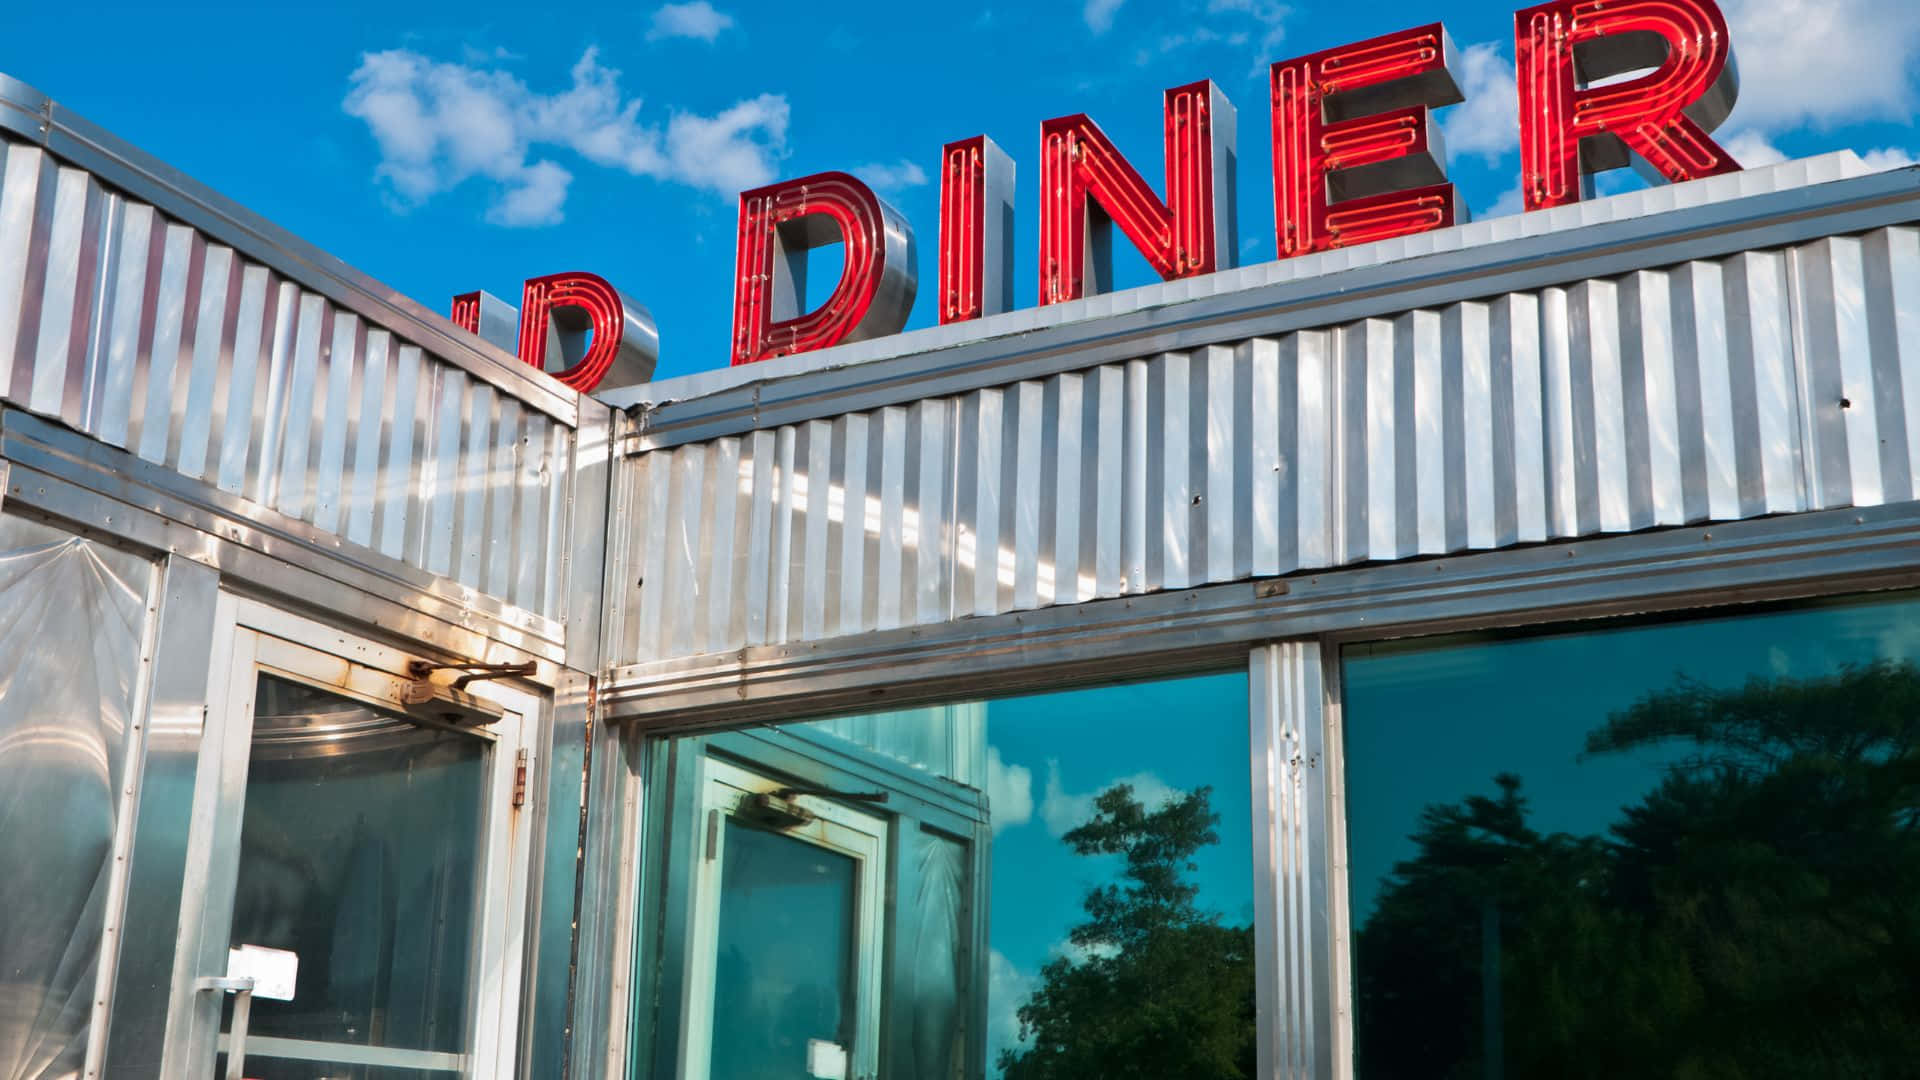 Retro Diner with Red Booths and Vintage Decor